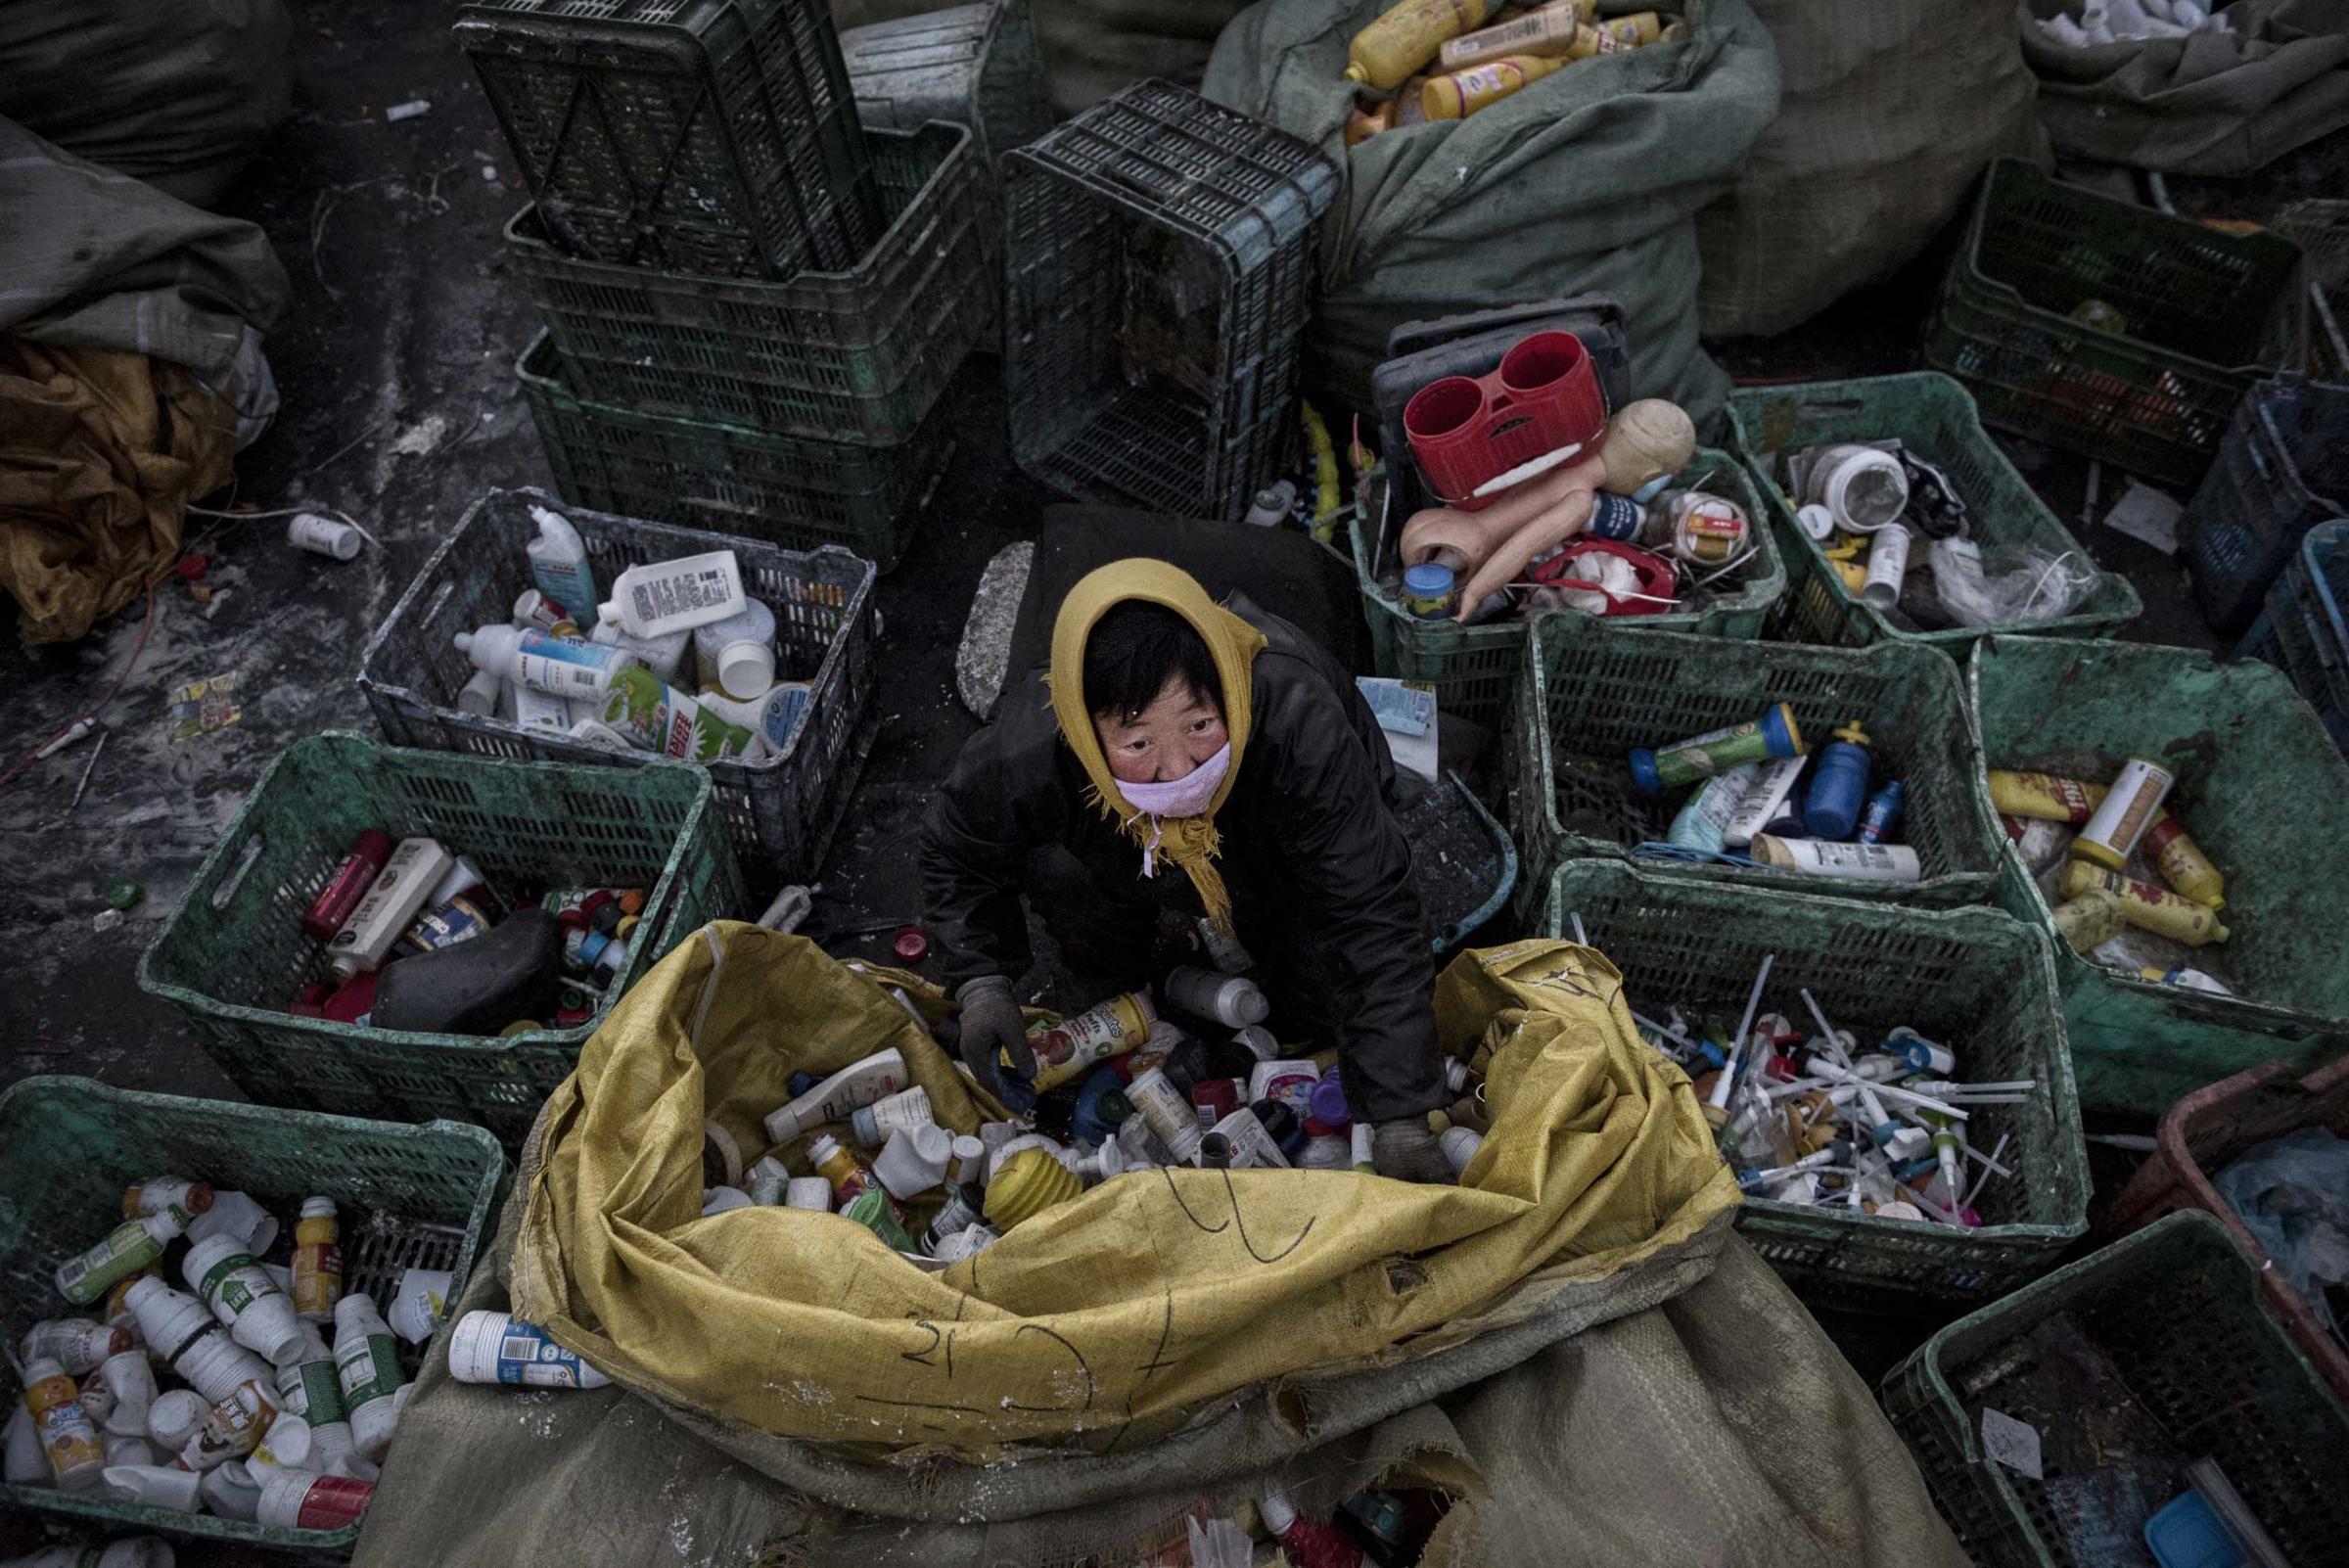 A Chinese laborer sorts plastic before being recycled in the Dong Xiao Kou village on Dec. 15, 2014 in Beijing.